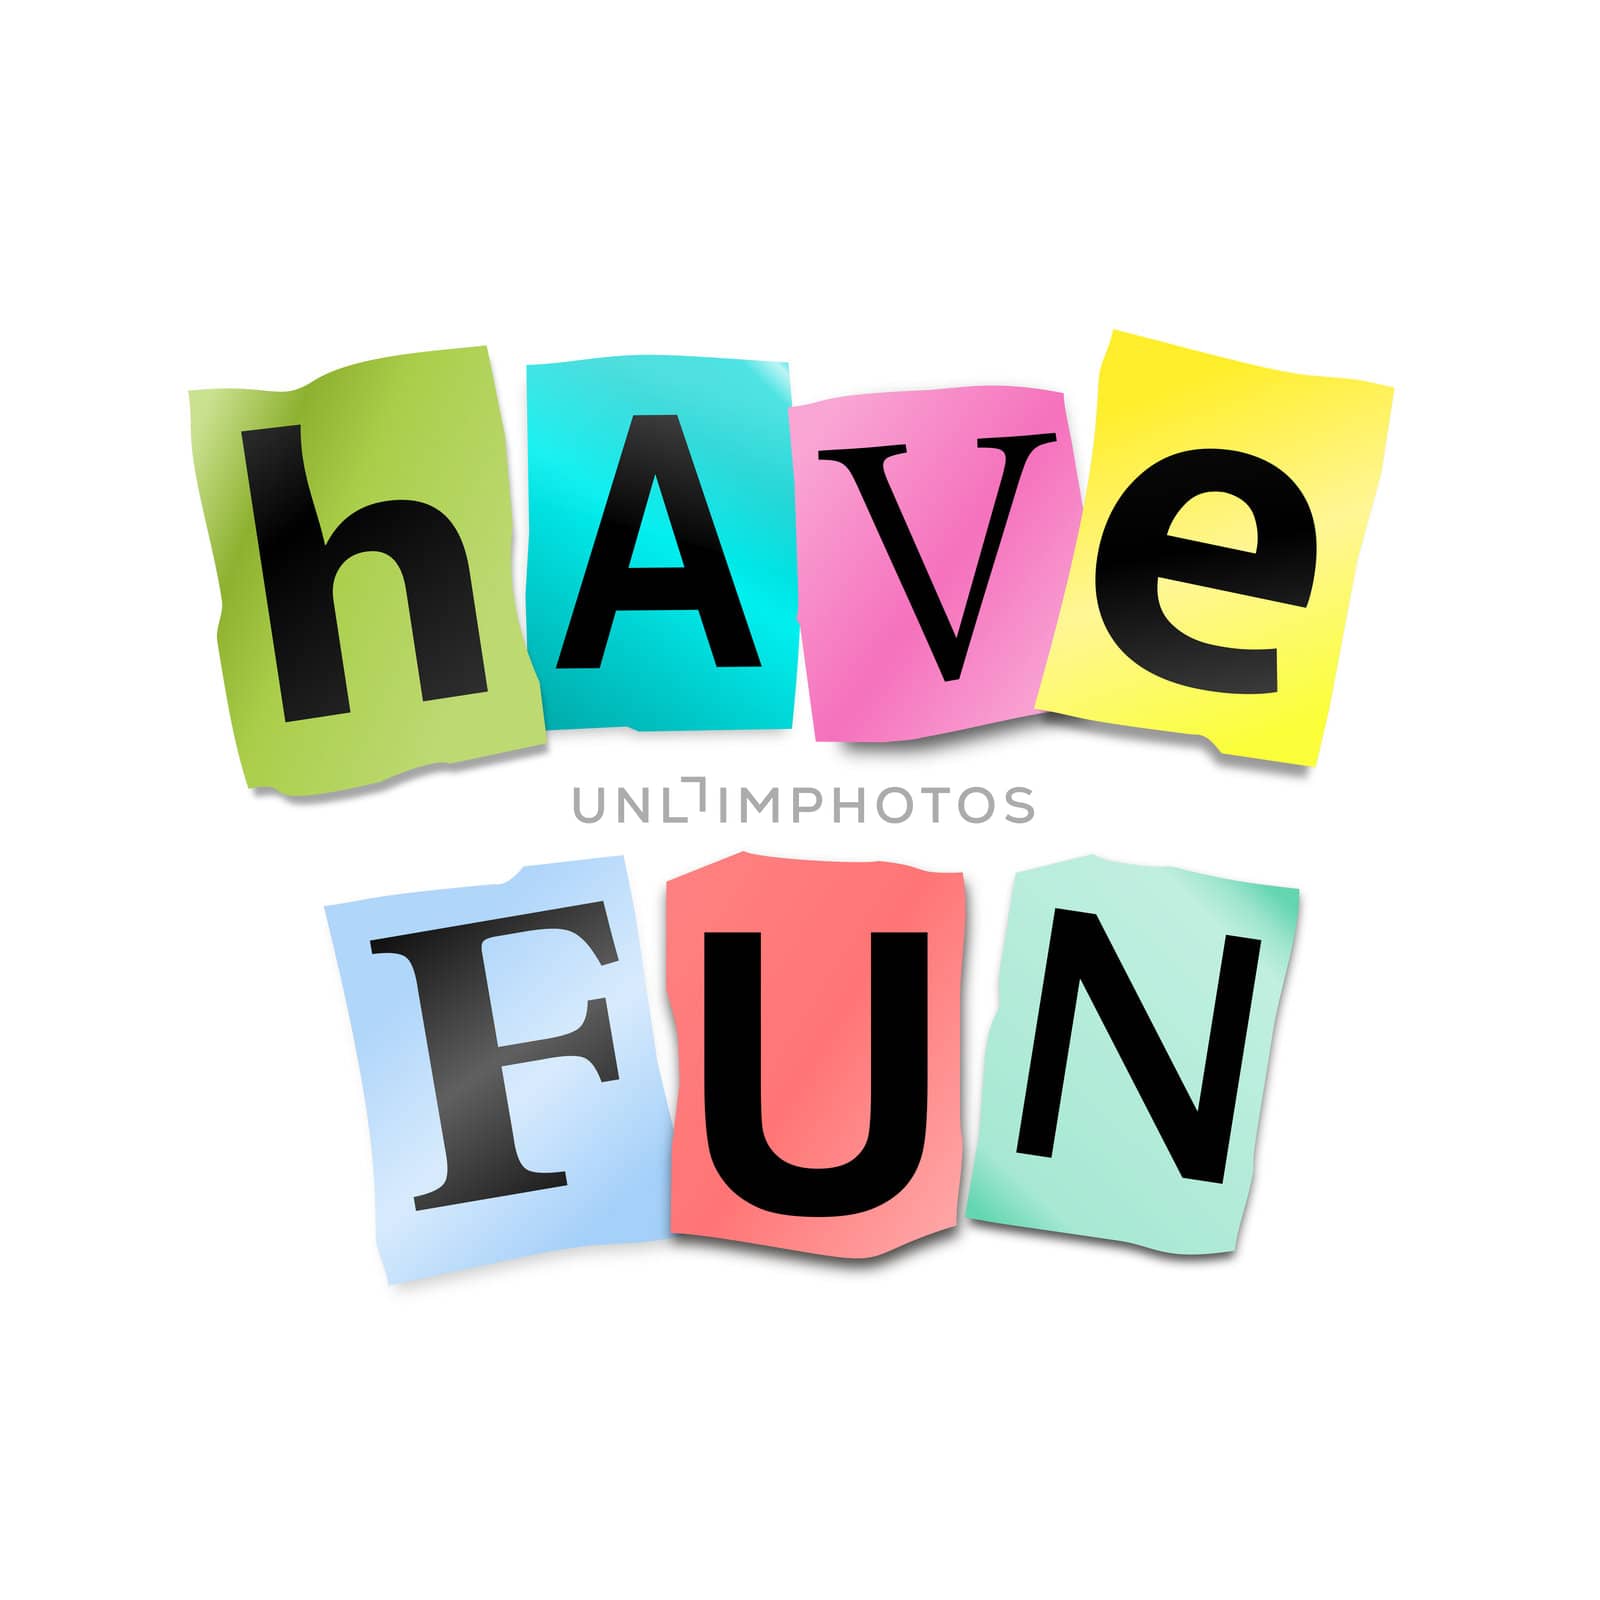 Illustration depicting cutout printed letters arranged to form the words have fun.